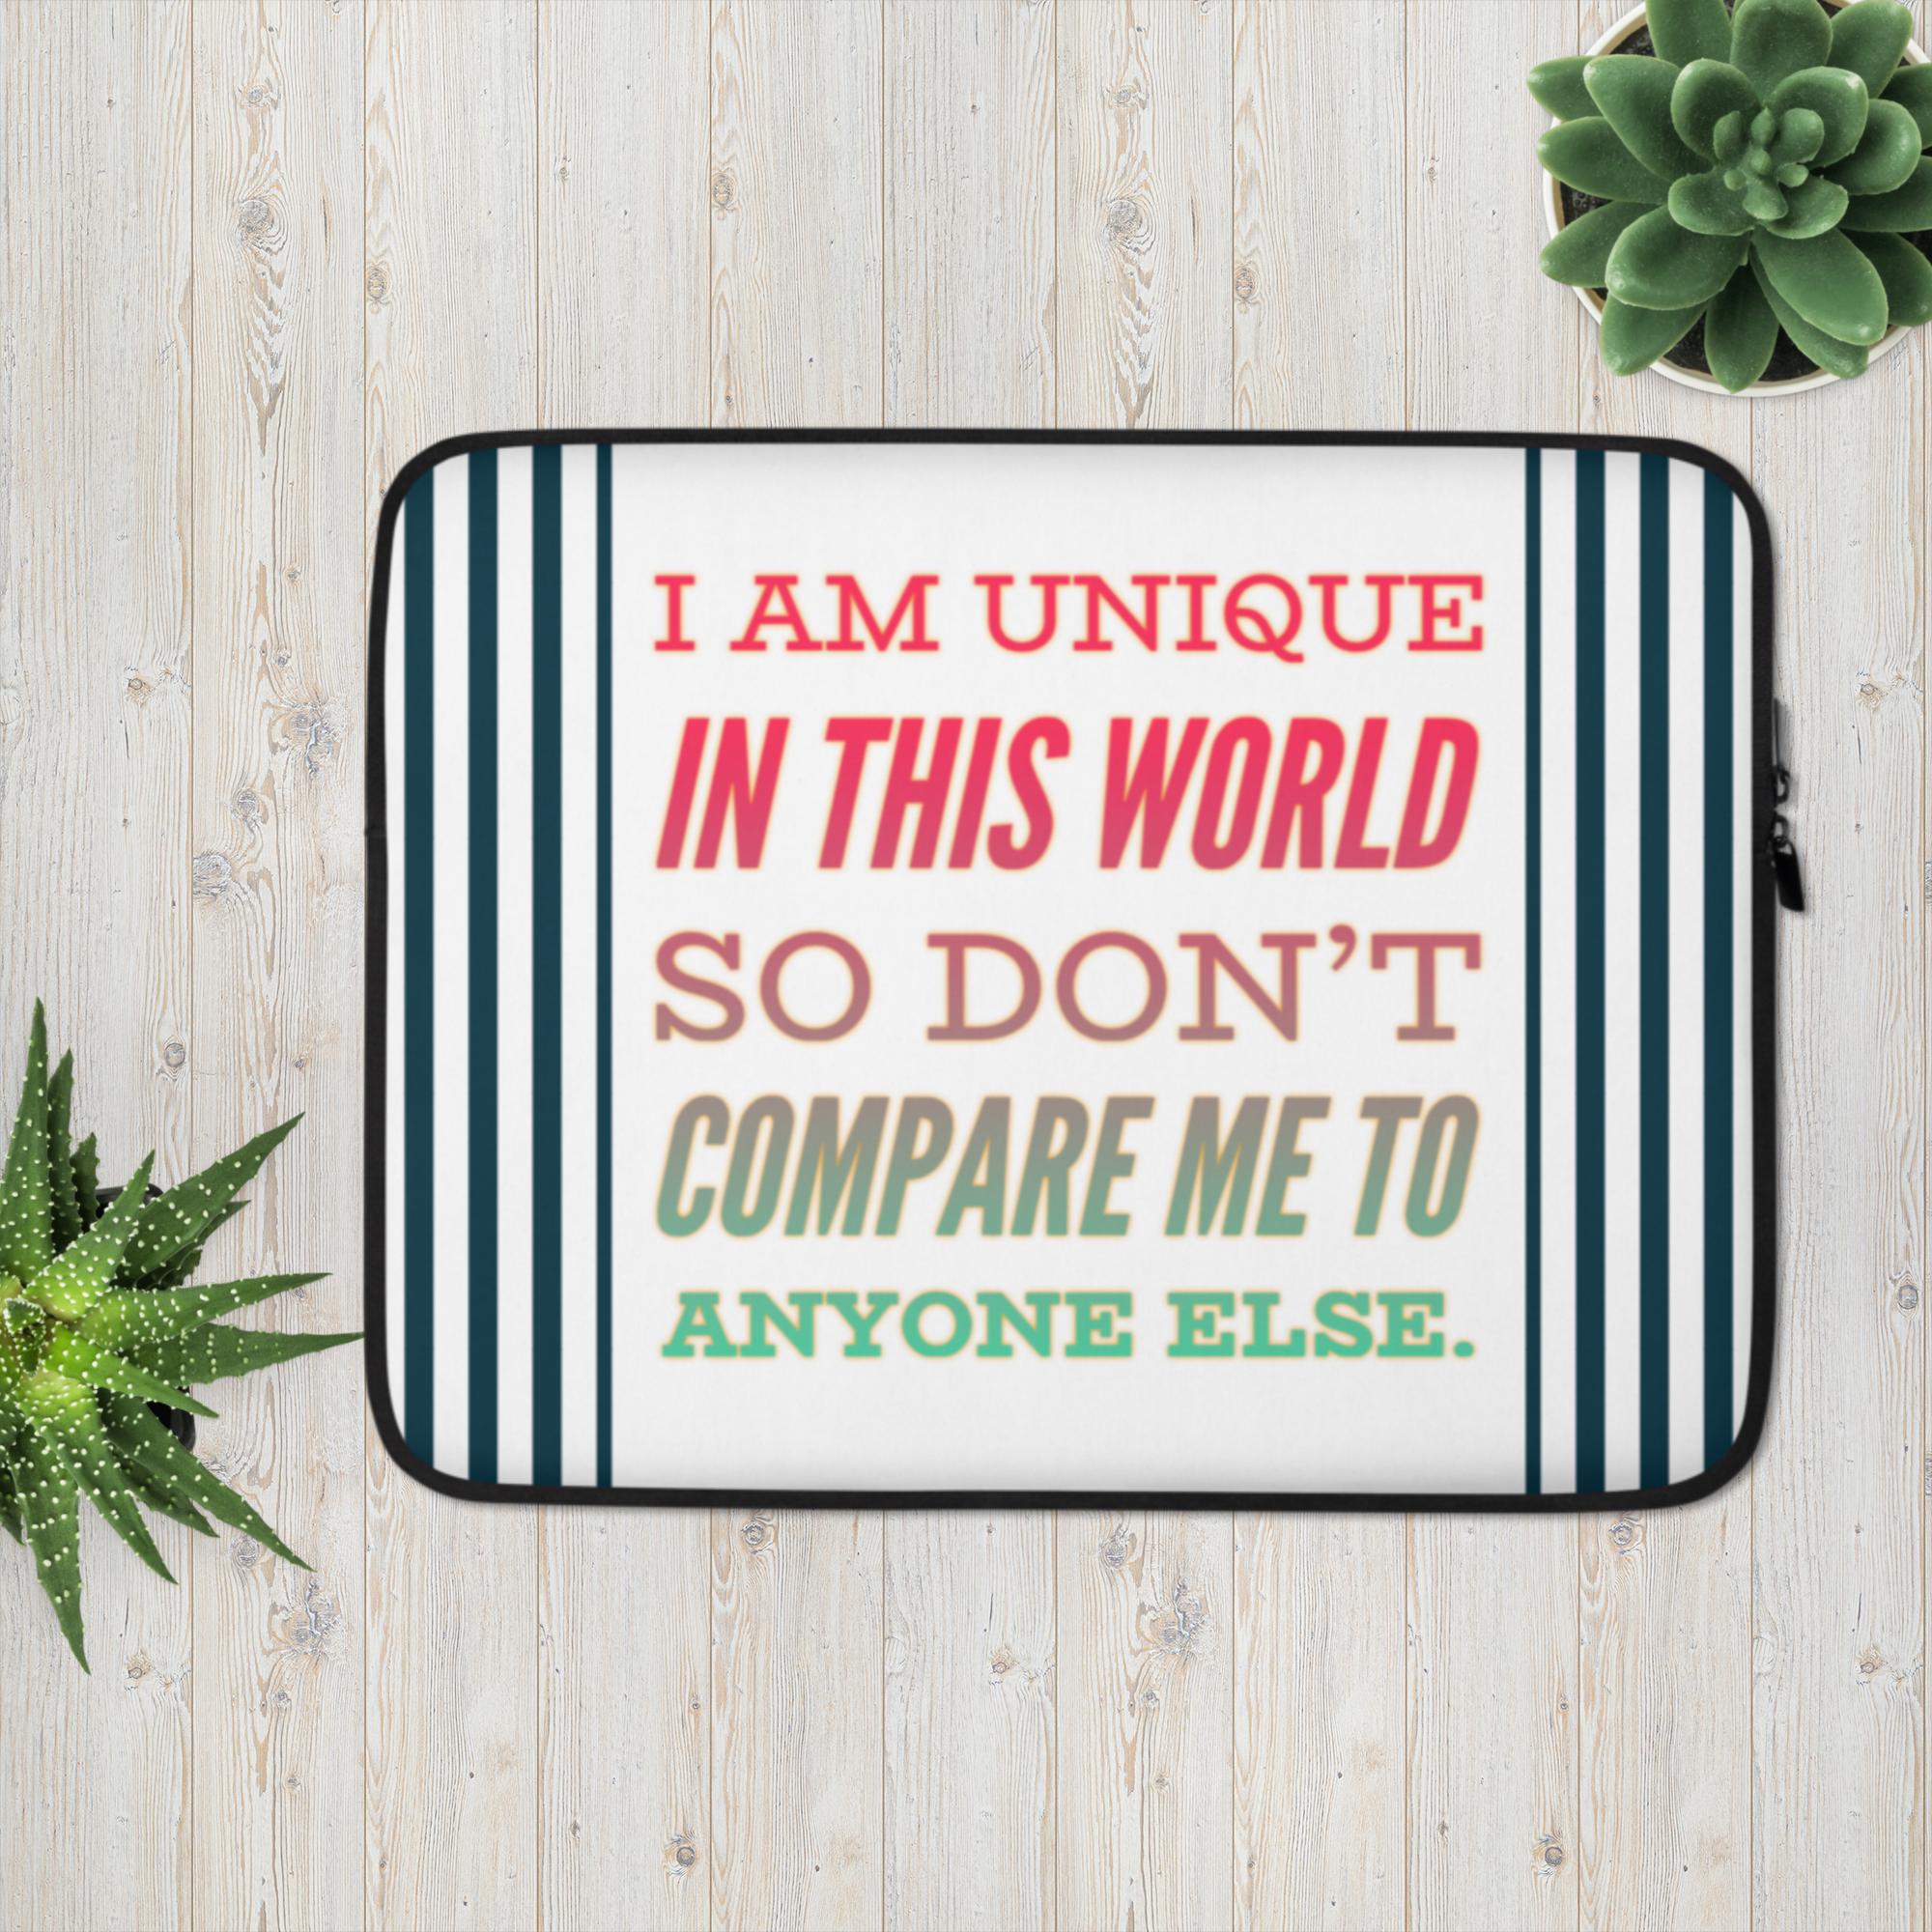 GloWell Designs - Laptop Sleeve - Affirmation Quote - I Am Unique - GloWell Designs